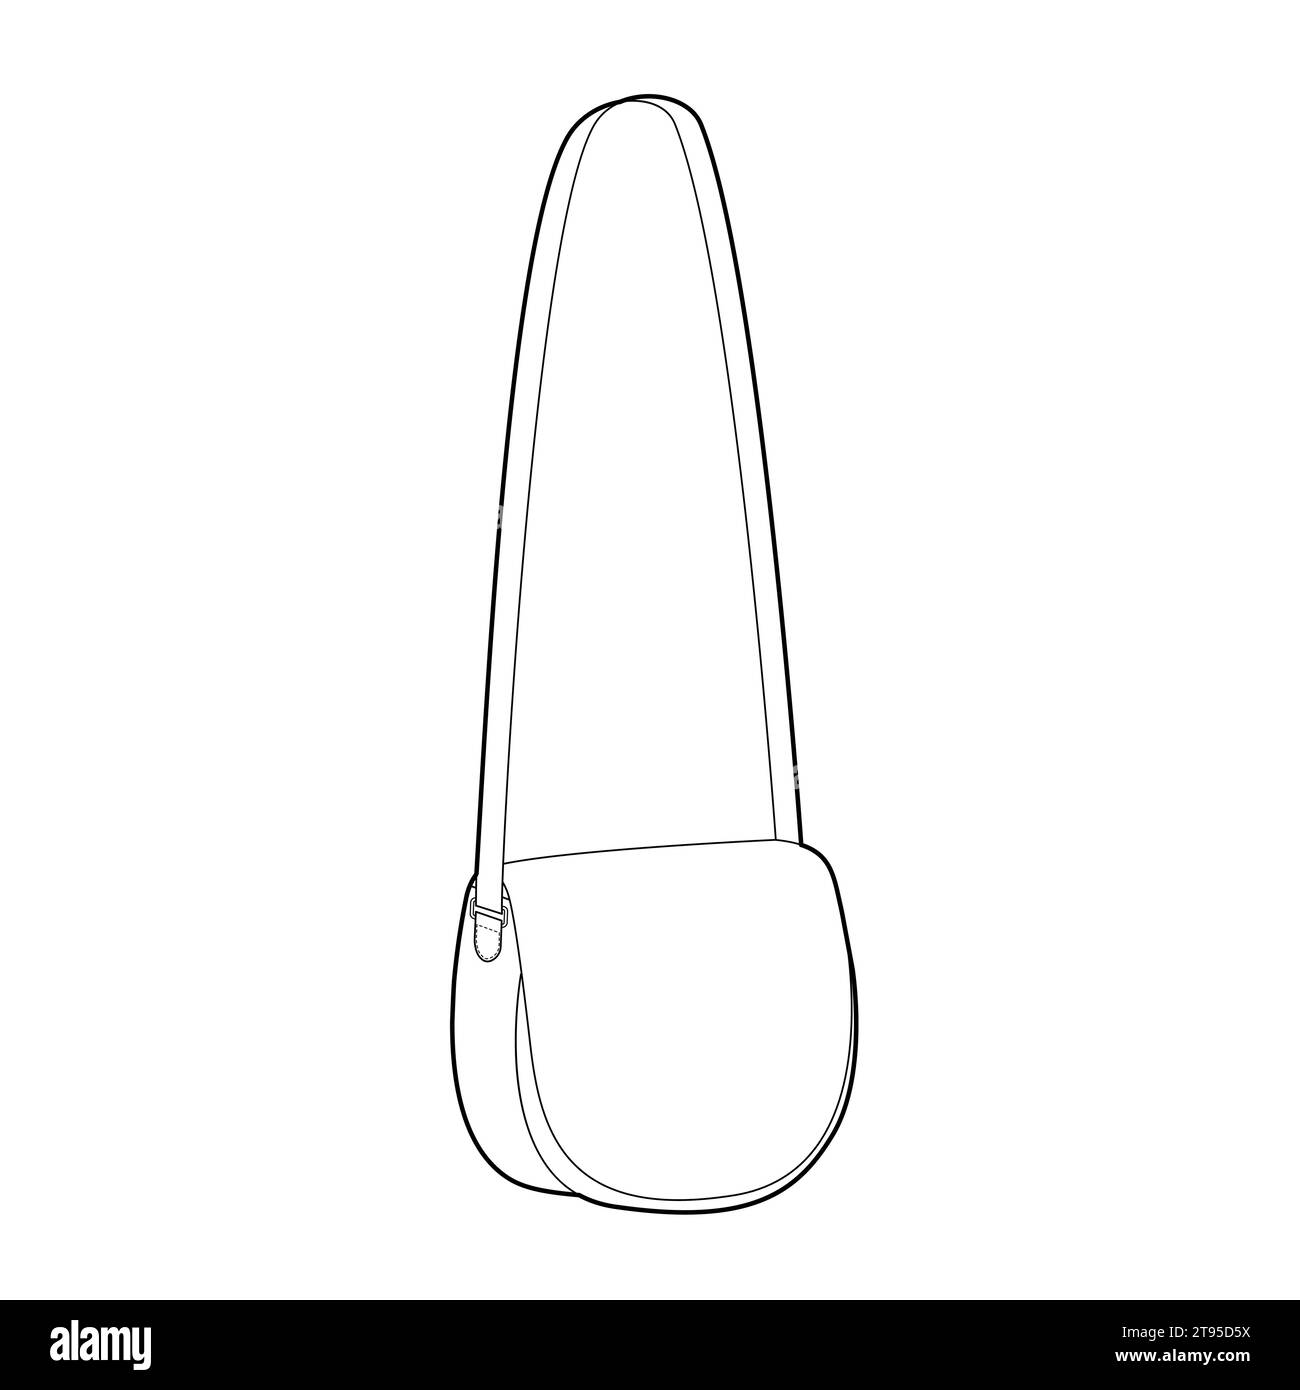 Saddle Cross-Body Bag silhouette. Fashion accessory technical illustration. Vector satchel front 3-4 view for Men, women, unisex style, flat handbag CAD mockup sketch outline isolated Stock Vector